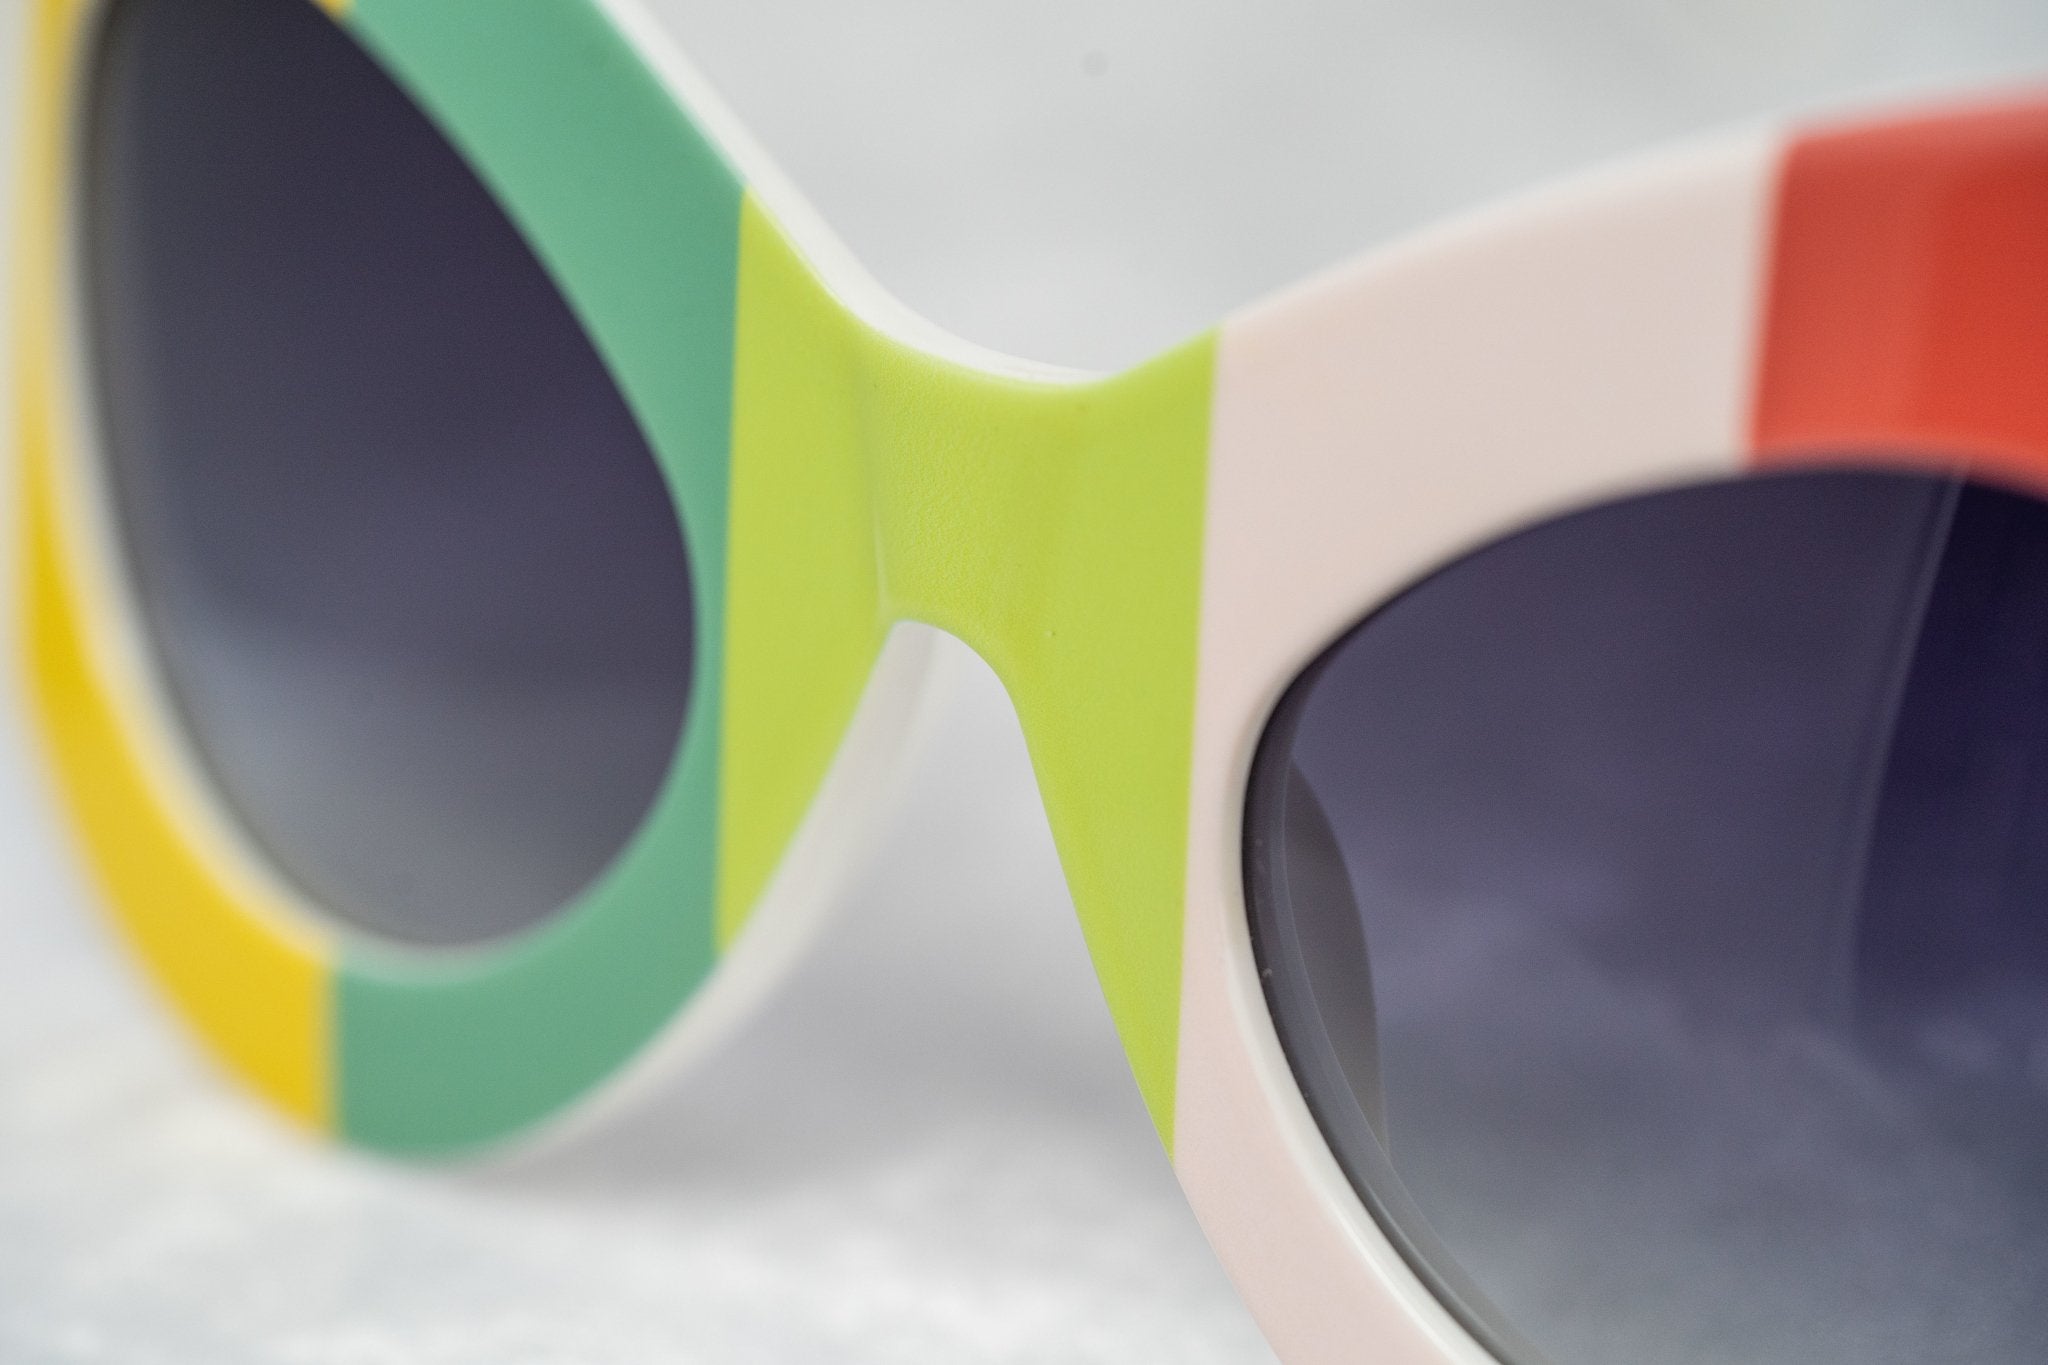 Jeremy Scott Sunglasses Cat Eye Multicoloured Bars With Grey Category 3 Graduated Lenses JSCATEYEC2SUN - Watches & Crystals